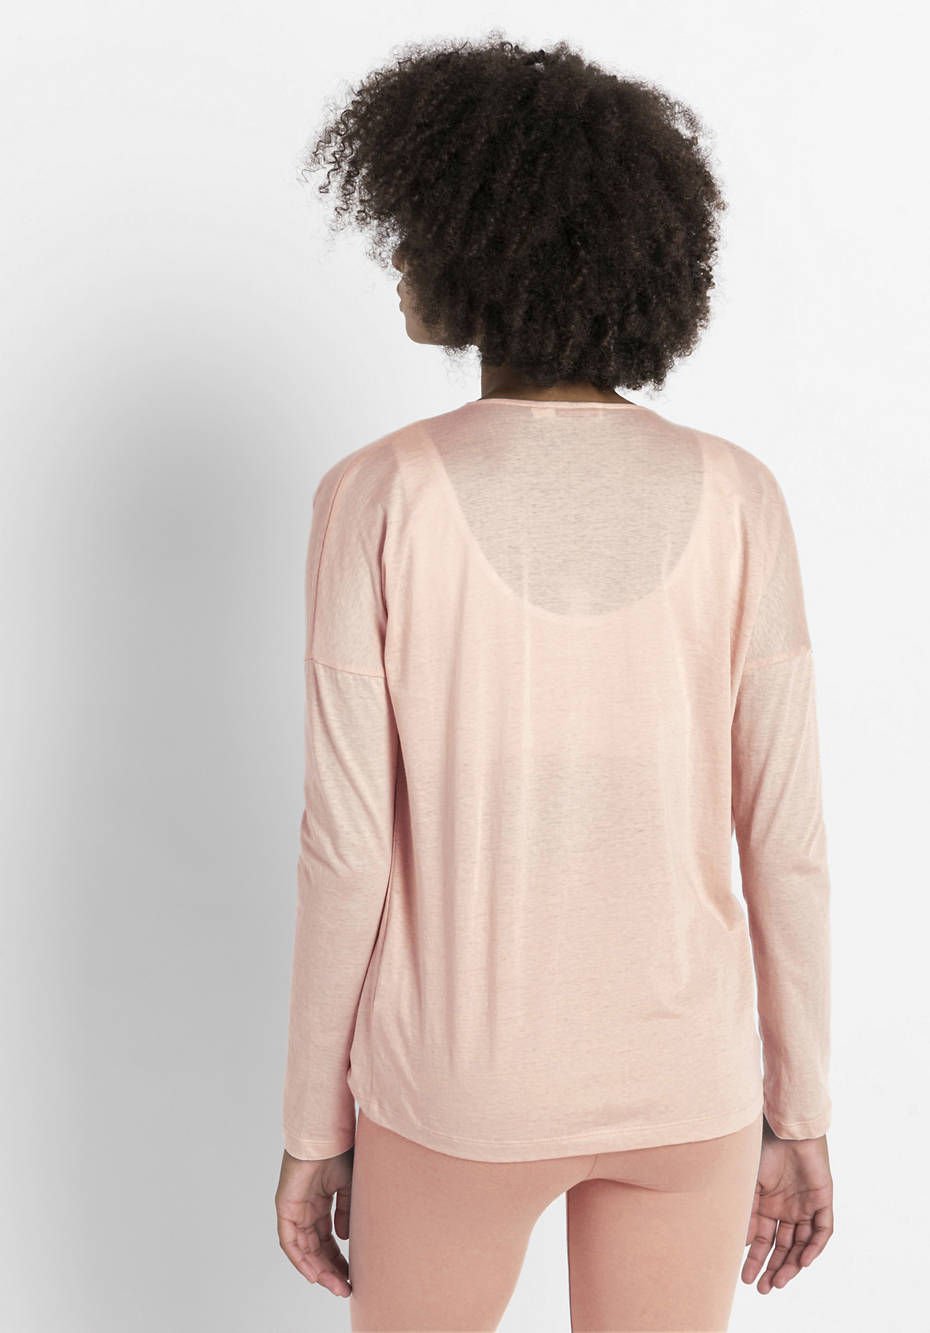 Yoga shirt made from pure organic cotton